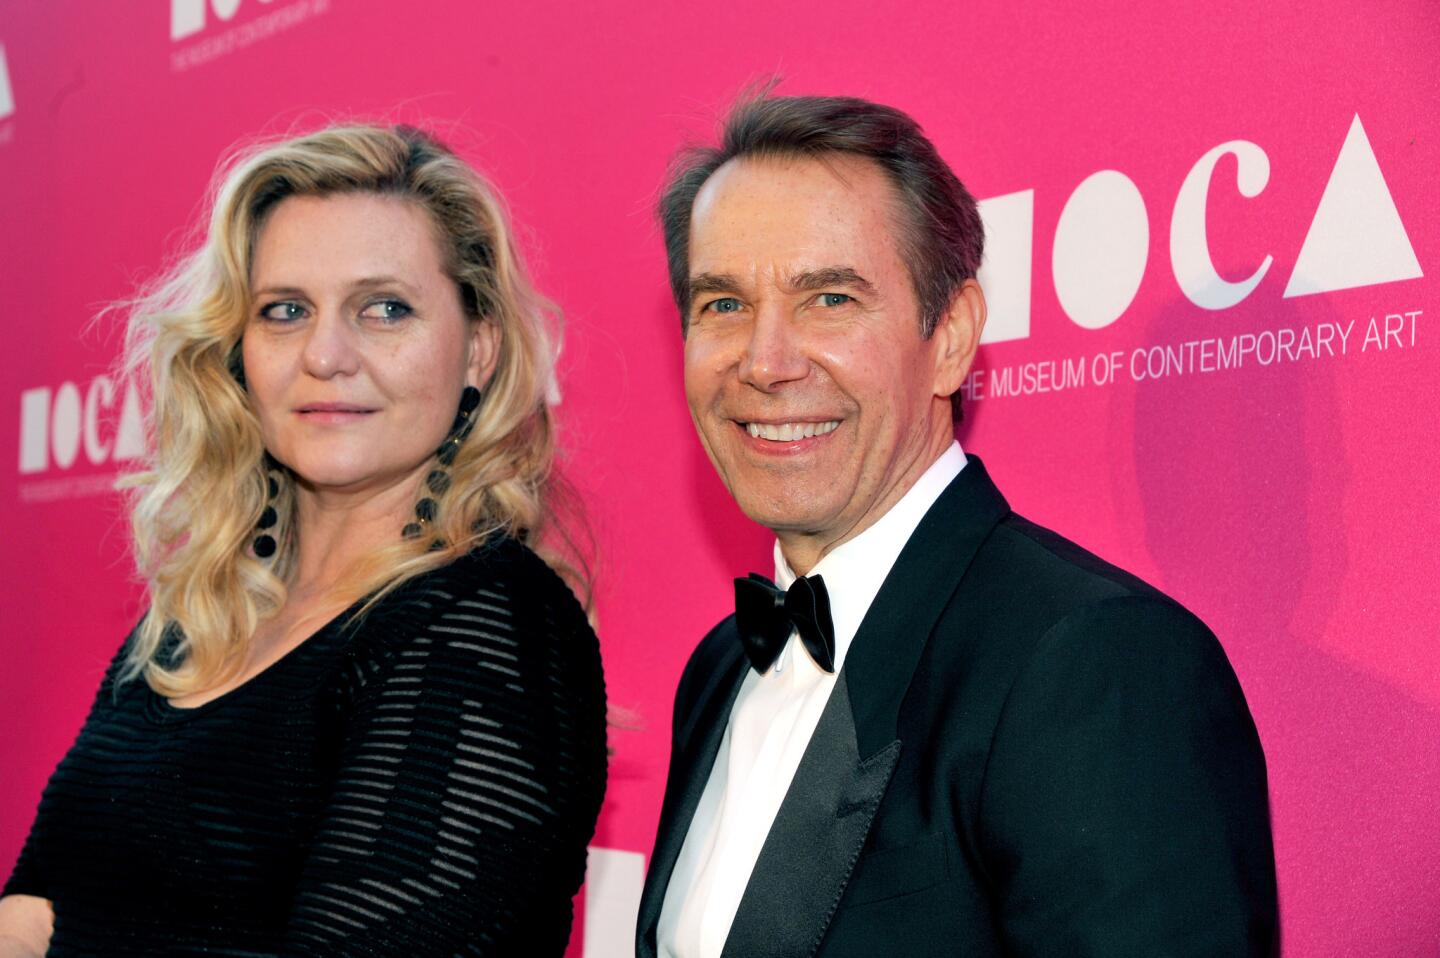 Artist Justine Wheeler Koons and honoree Jeff Koons at the MOCA Gala 2017 honoring Jeff Koons at The Geffen Contemporary at MOCA in Los Angeles.